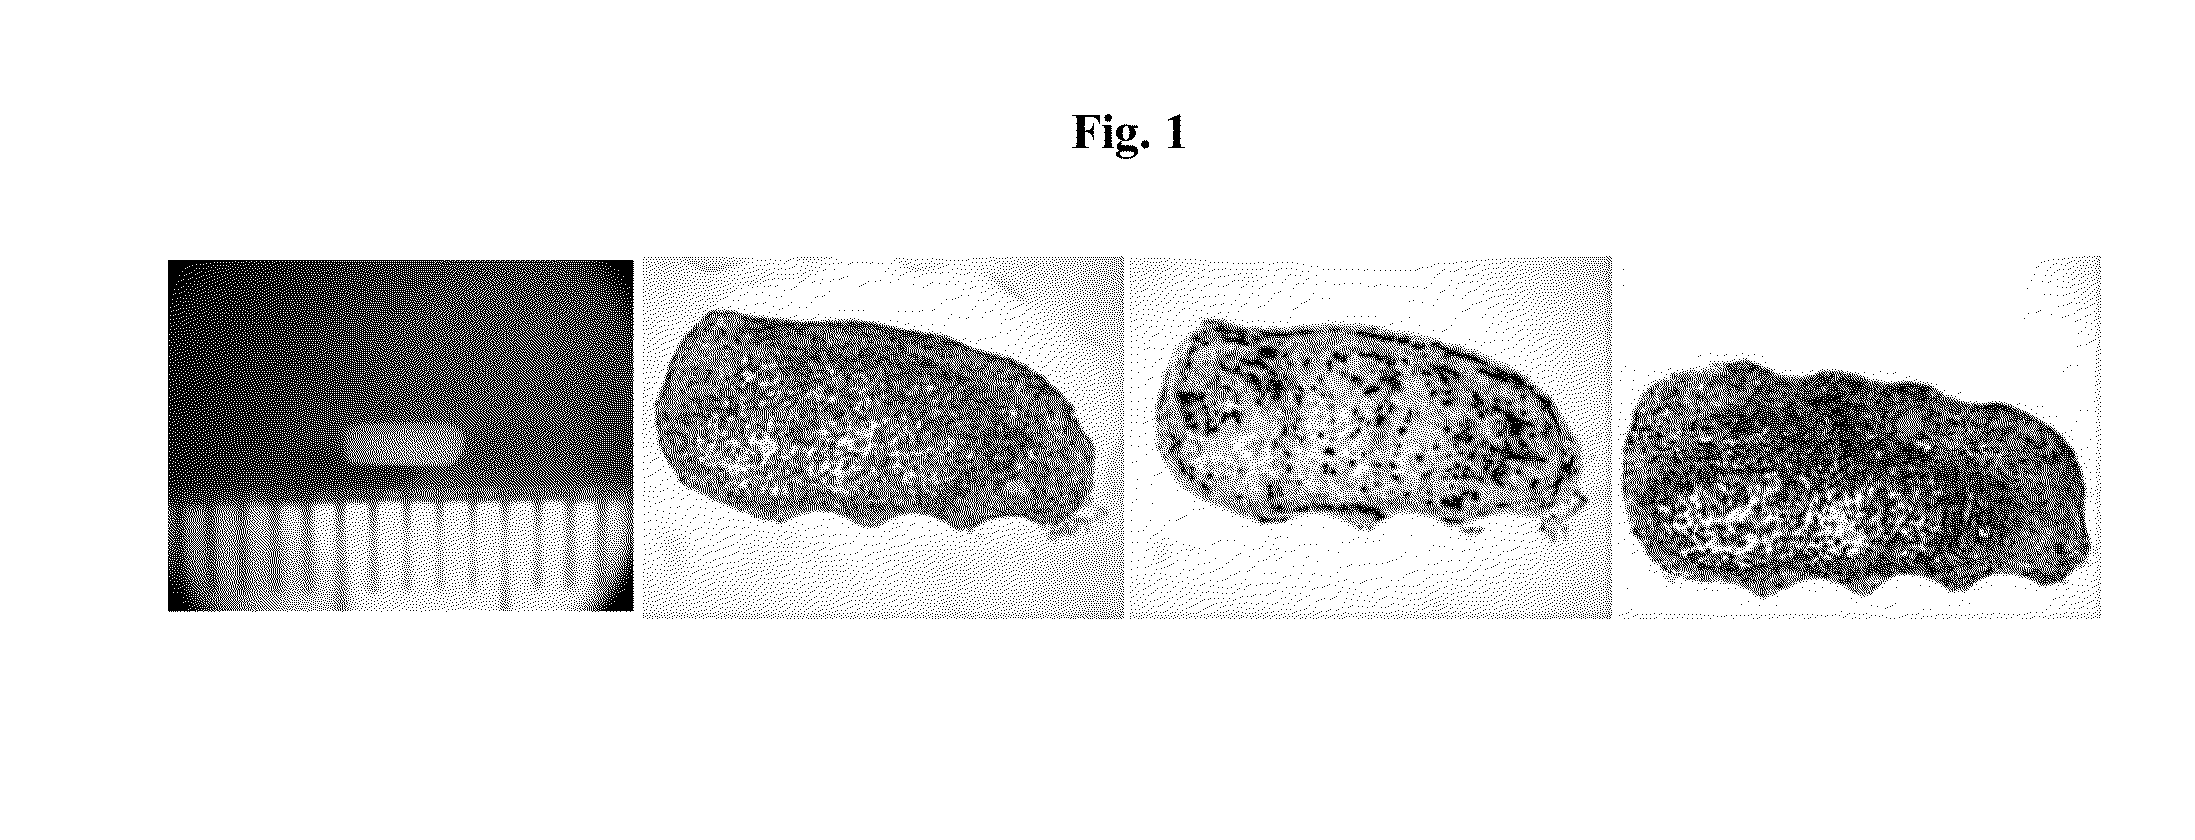 Engineered tissues for in vitro research uses, arrays thereof, and methods of making the same